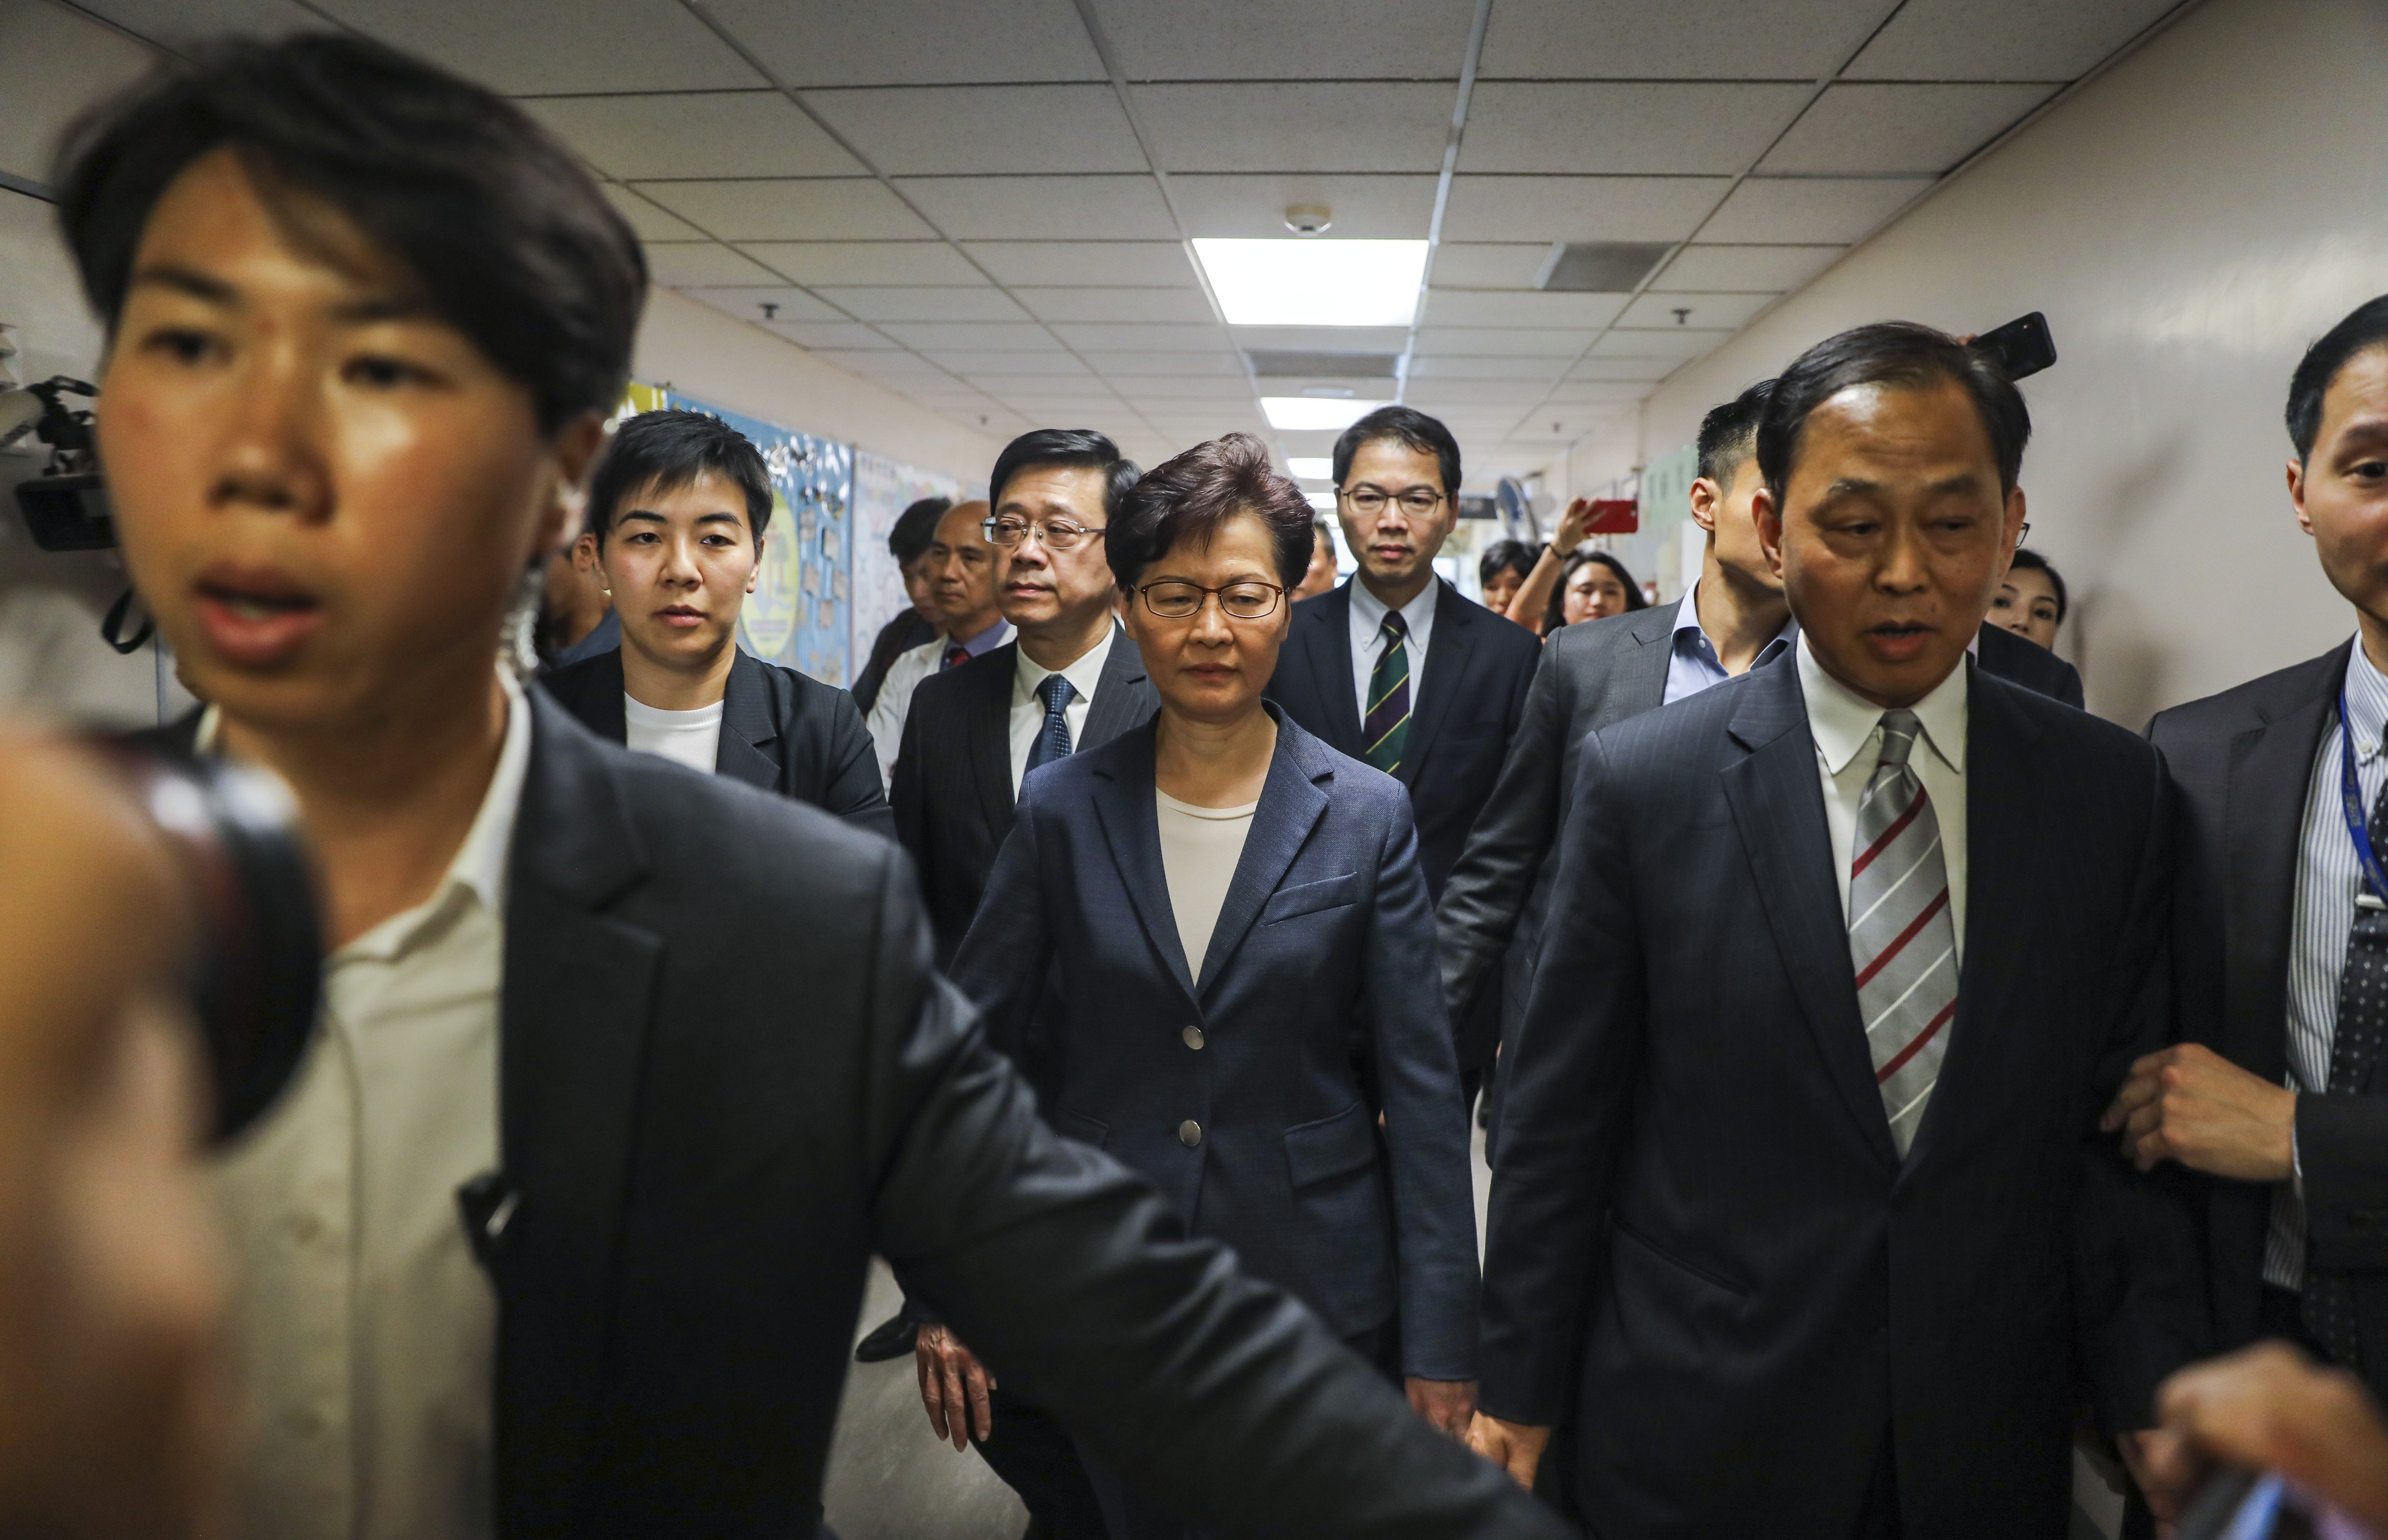 Hong Kong Chief Executive Carrie Lam visits a Tai Po hospital on July 15 to see a police officer injured in scuffles with protesters in Sha Tin the previous day. Photo: Sam Tsang